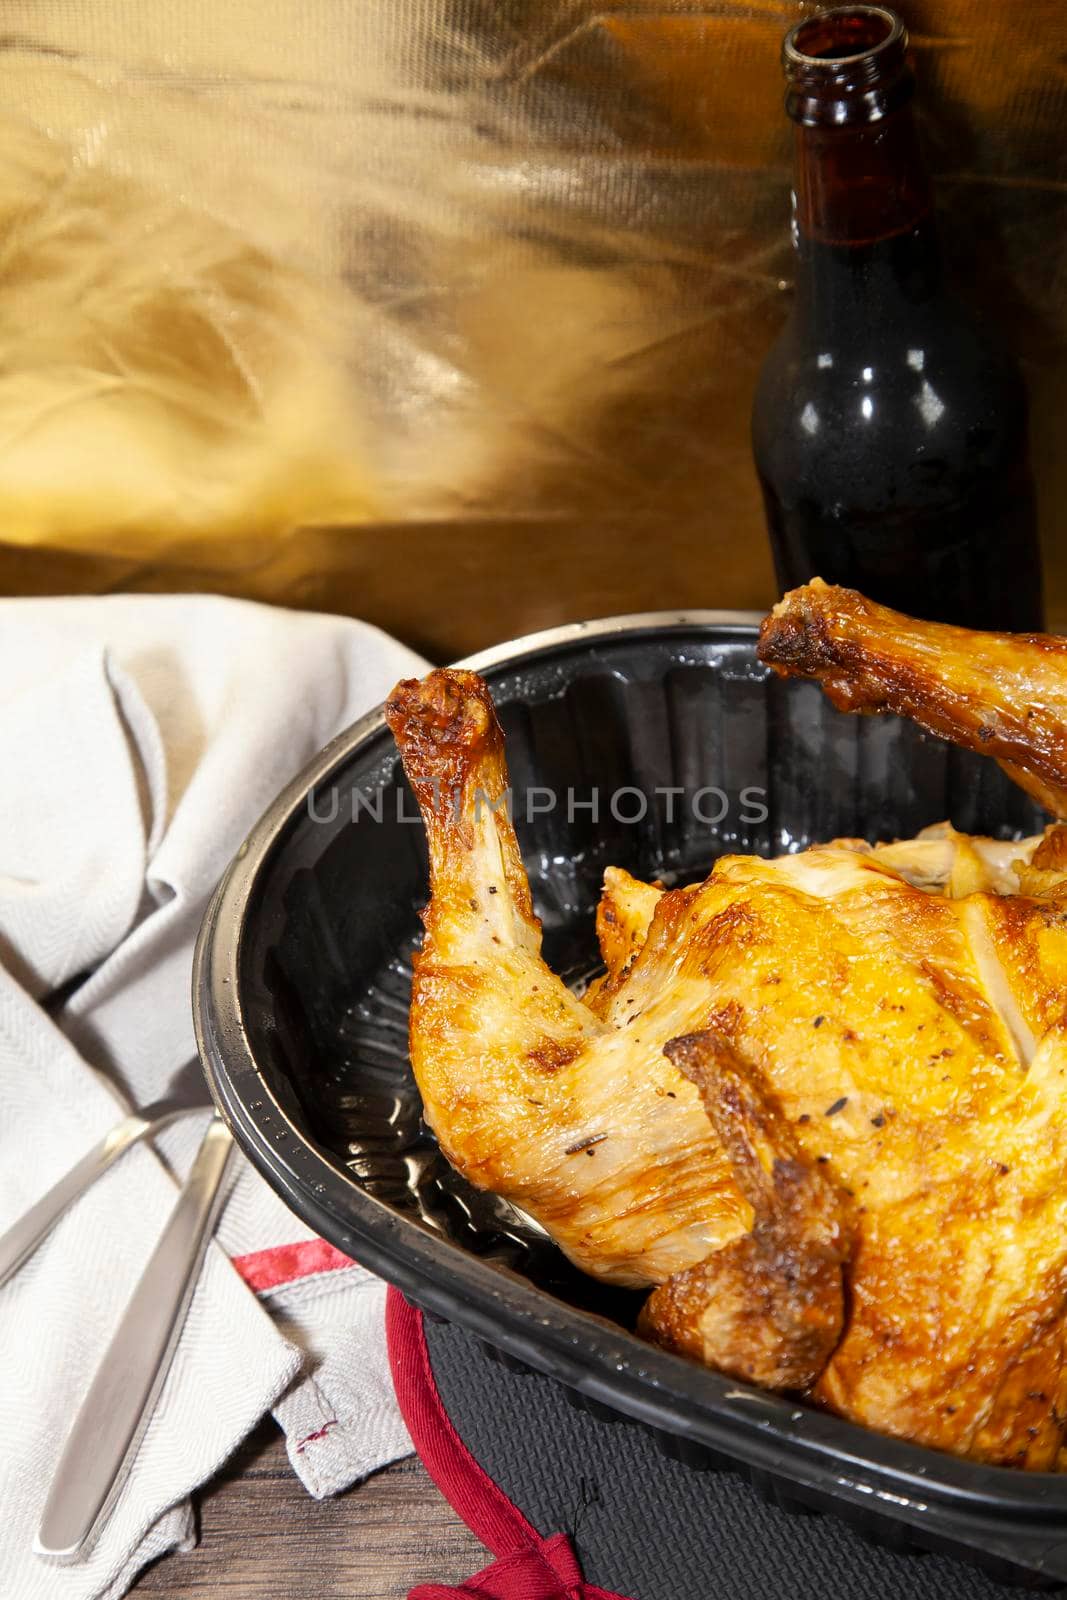 Whole roasted chicken in a black carryout container and a bottle of beer next to a grey napkin and silverware